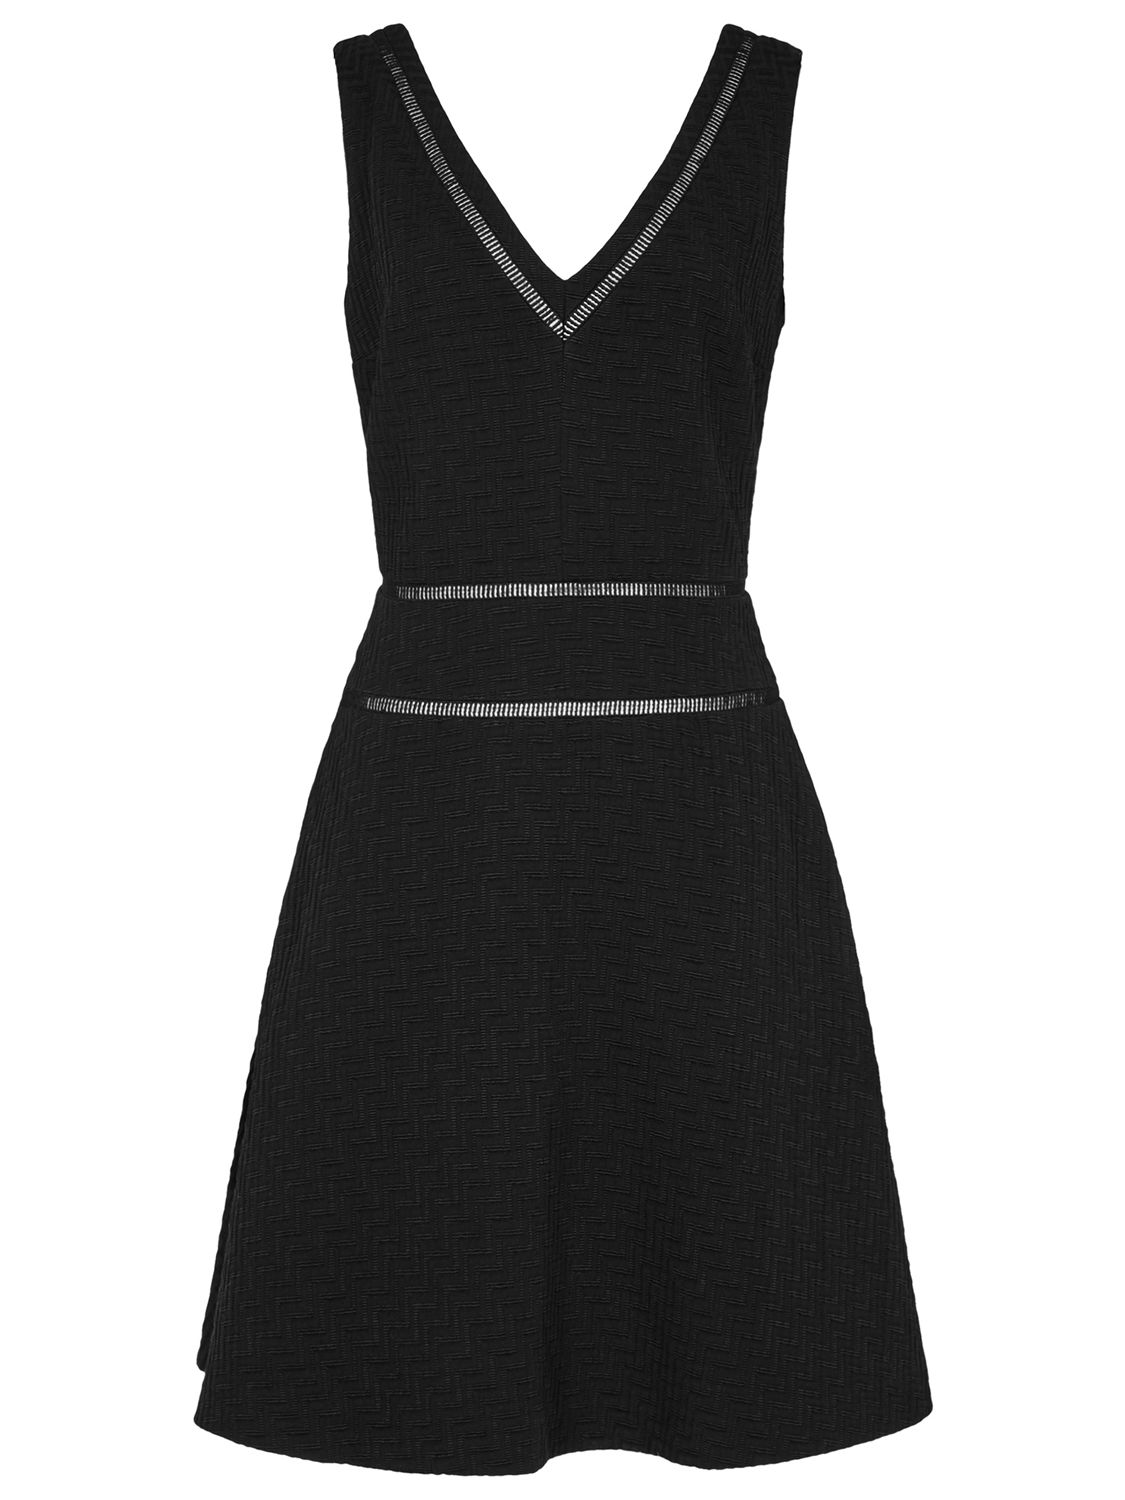 Reiss Nelly Textured Fit and Flare Dress